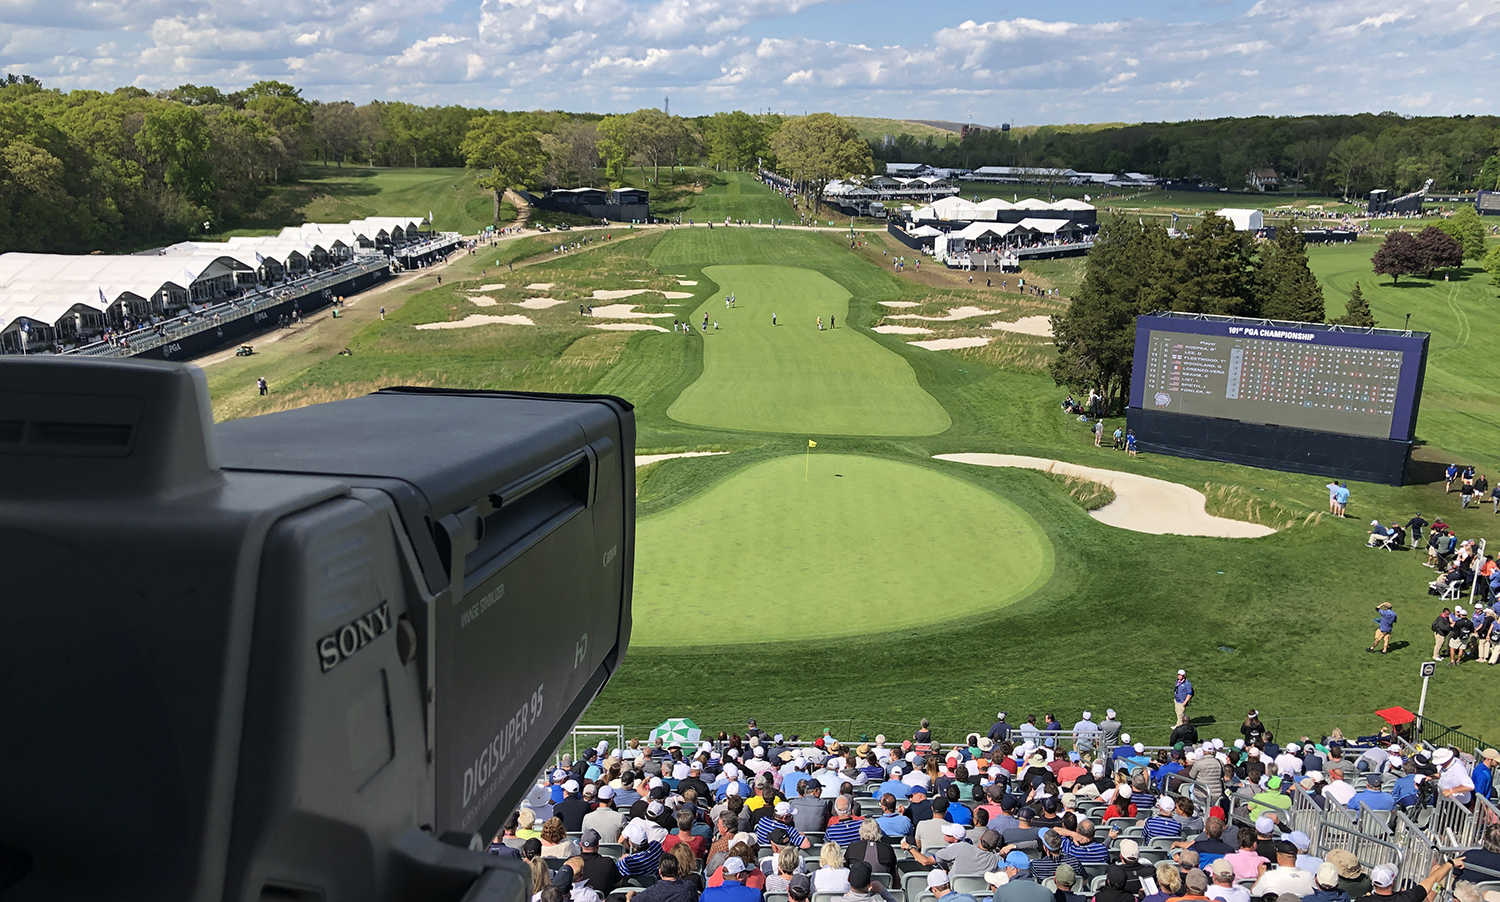 Live From the PGA Championship CBS Sports Caps Off Busy Start to 2019 With Massive Production at Bethpage